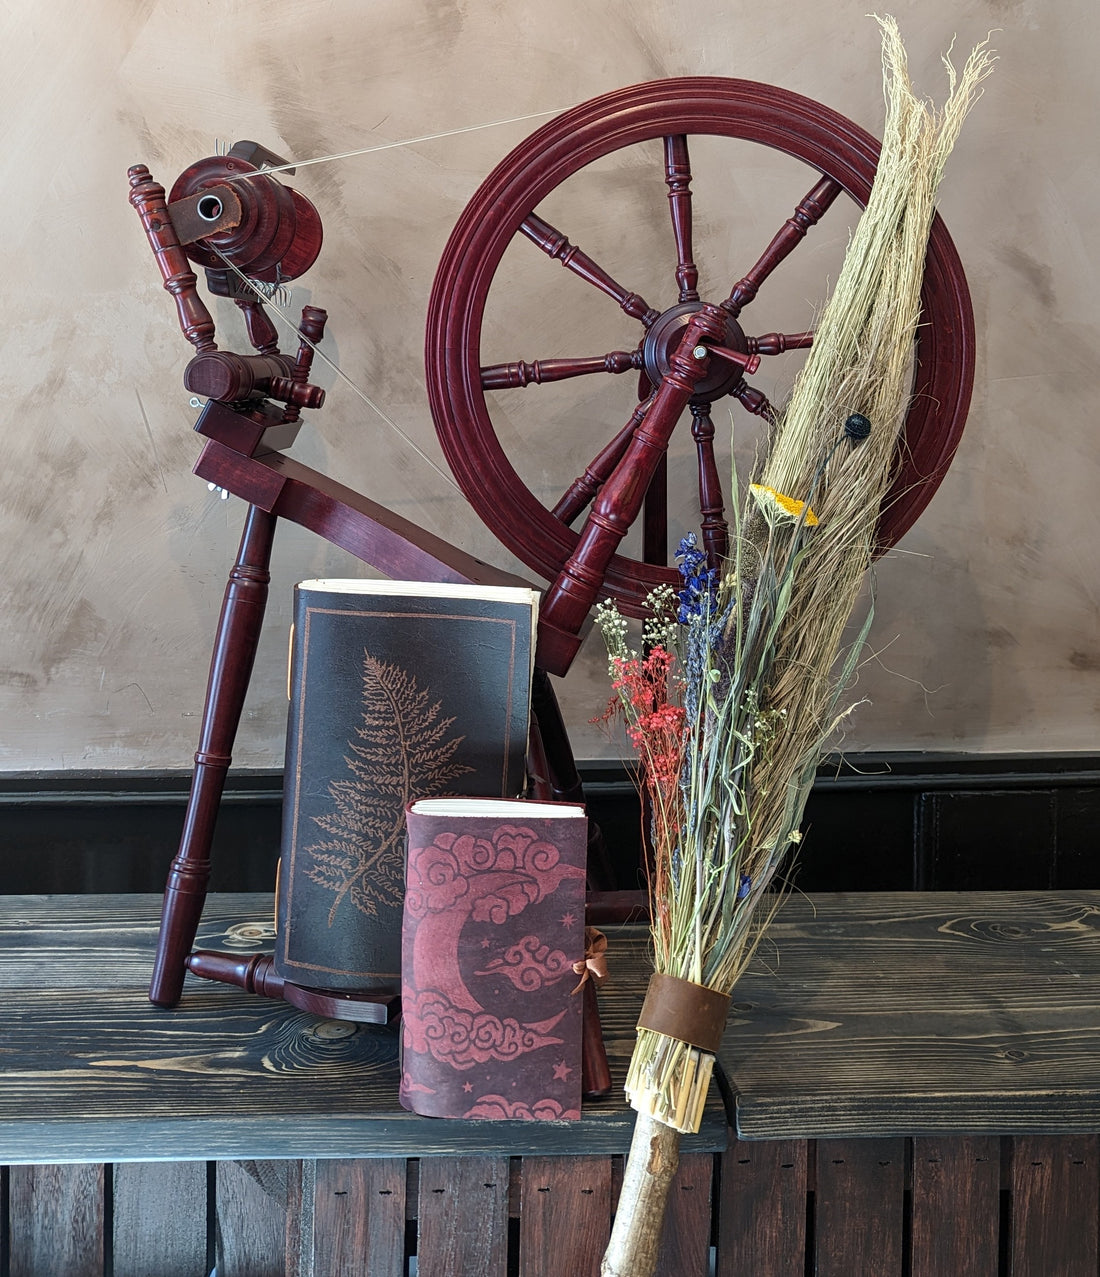 a spinning wheel, a broom, and two leatherbound journals